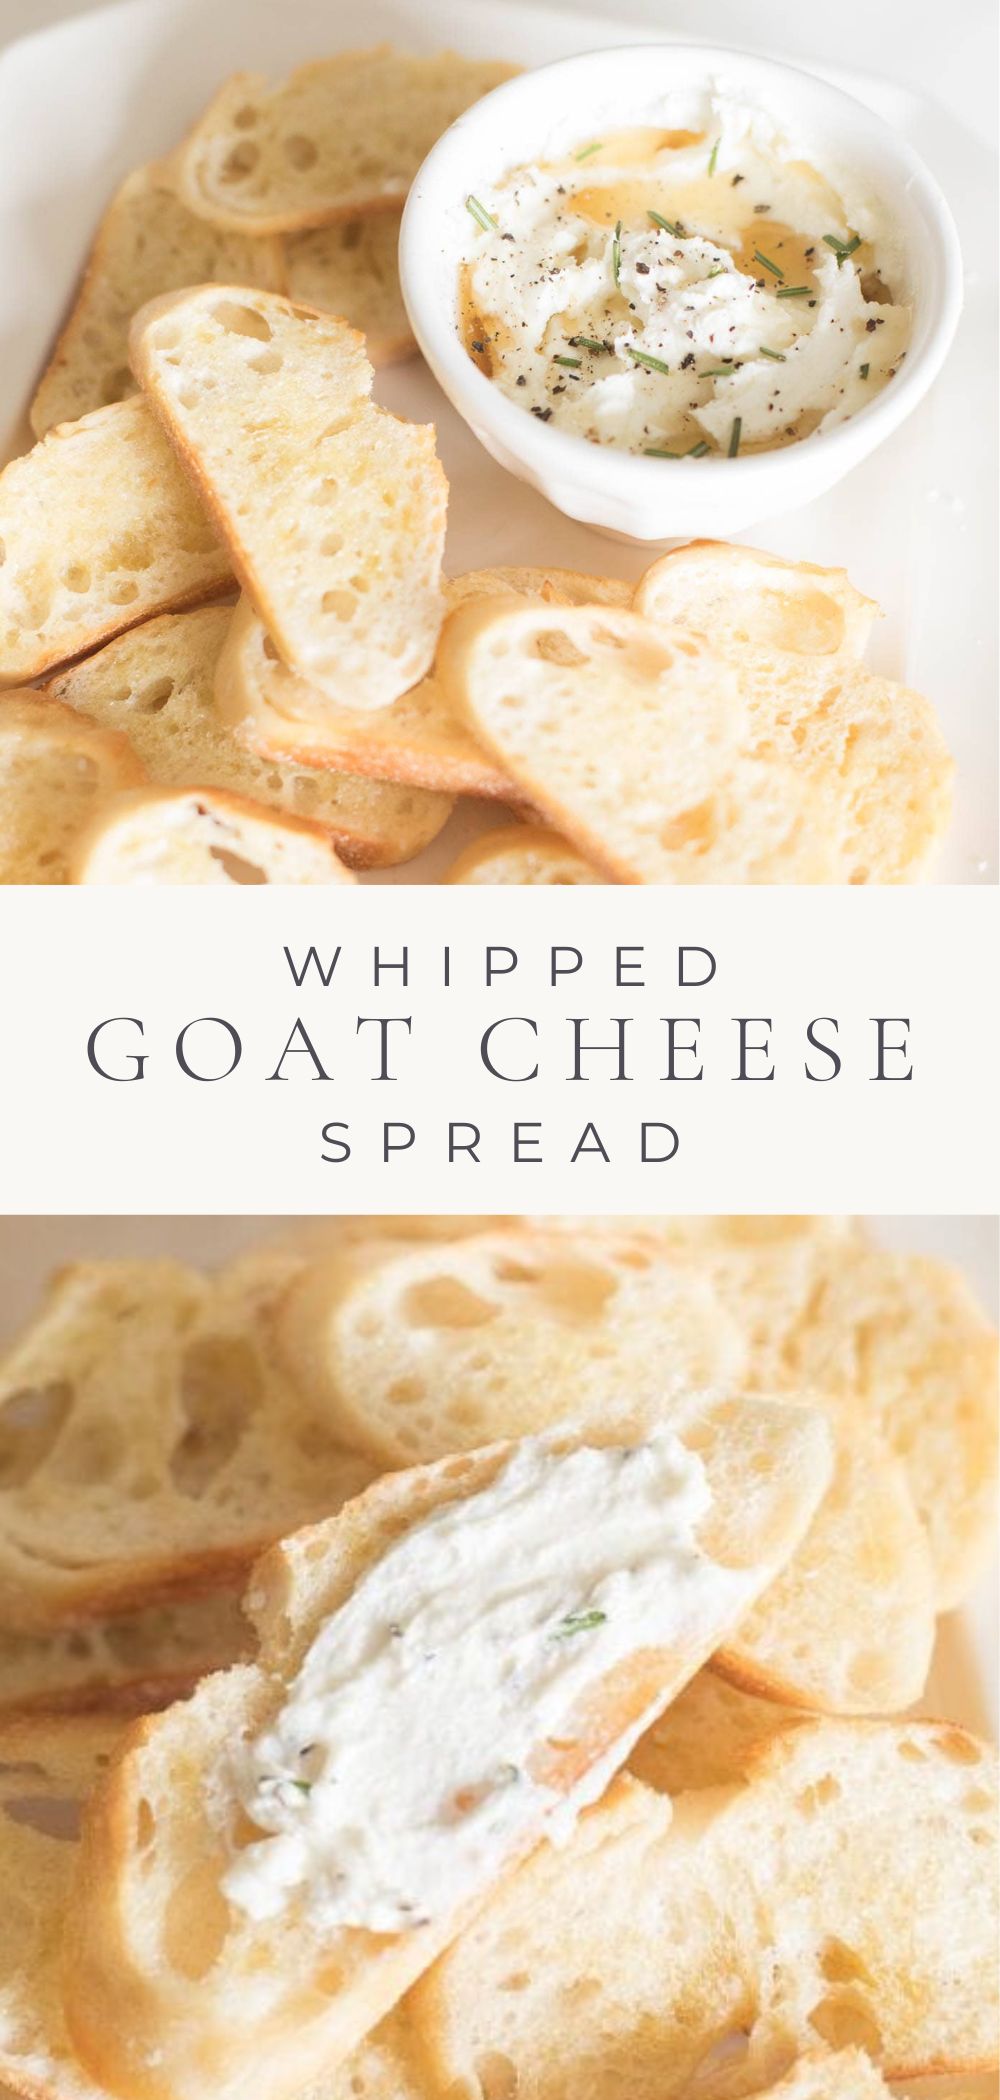 Two pictures of whipped goat cheese spread with crostini for dipping